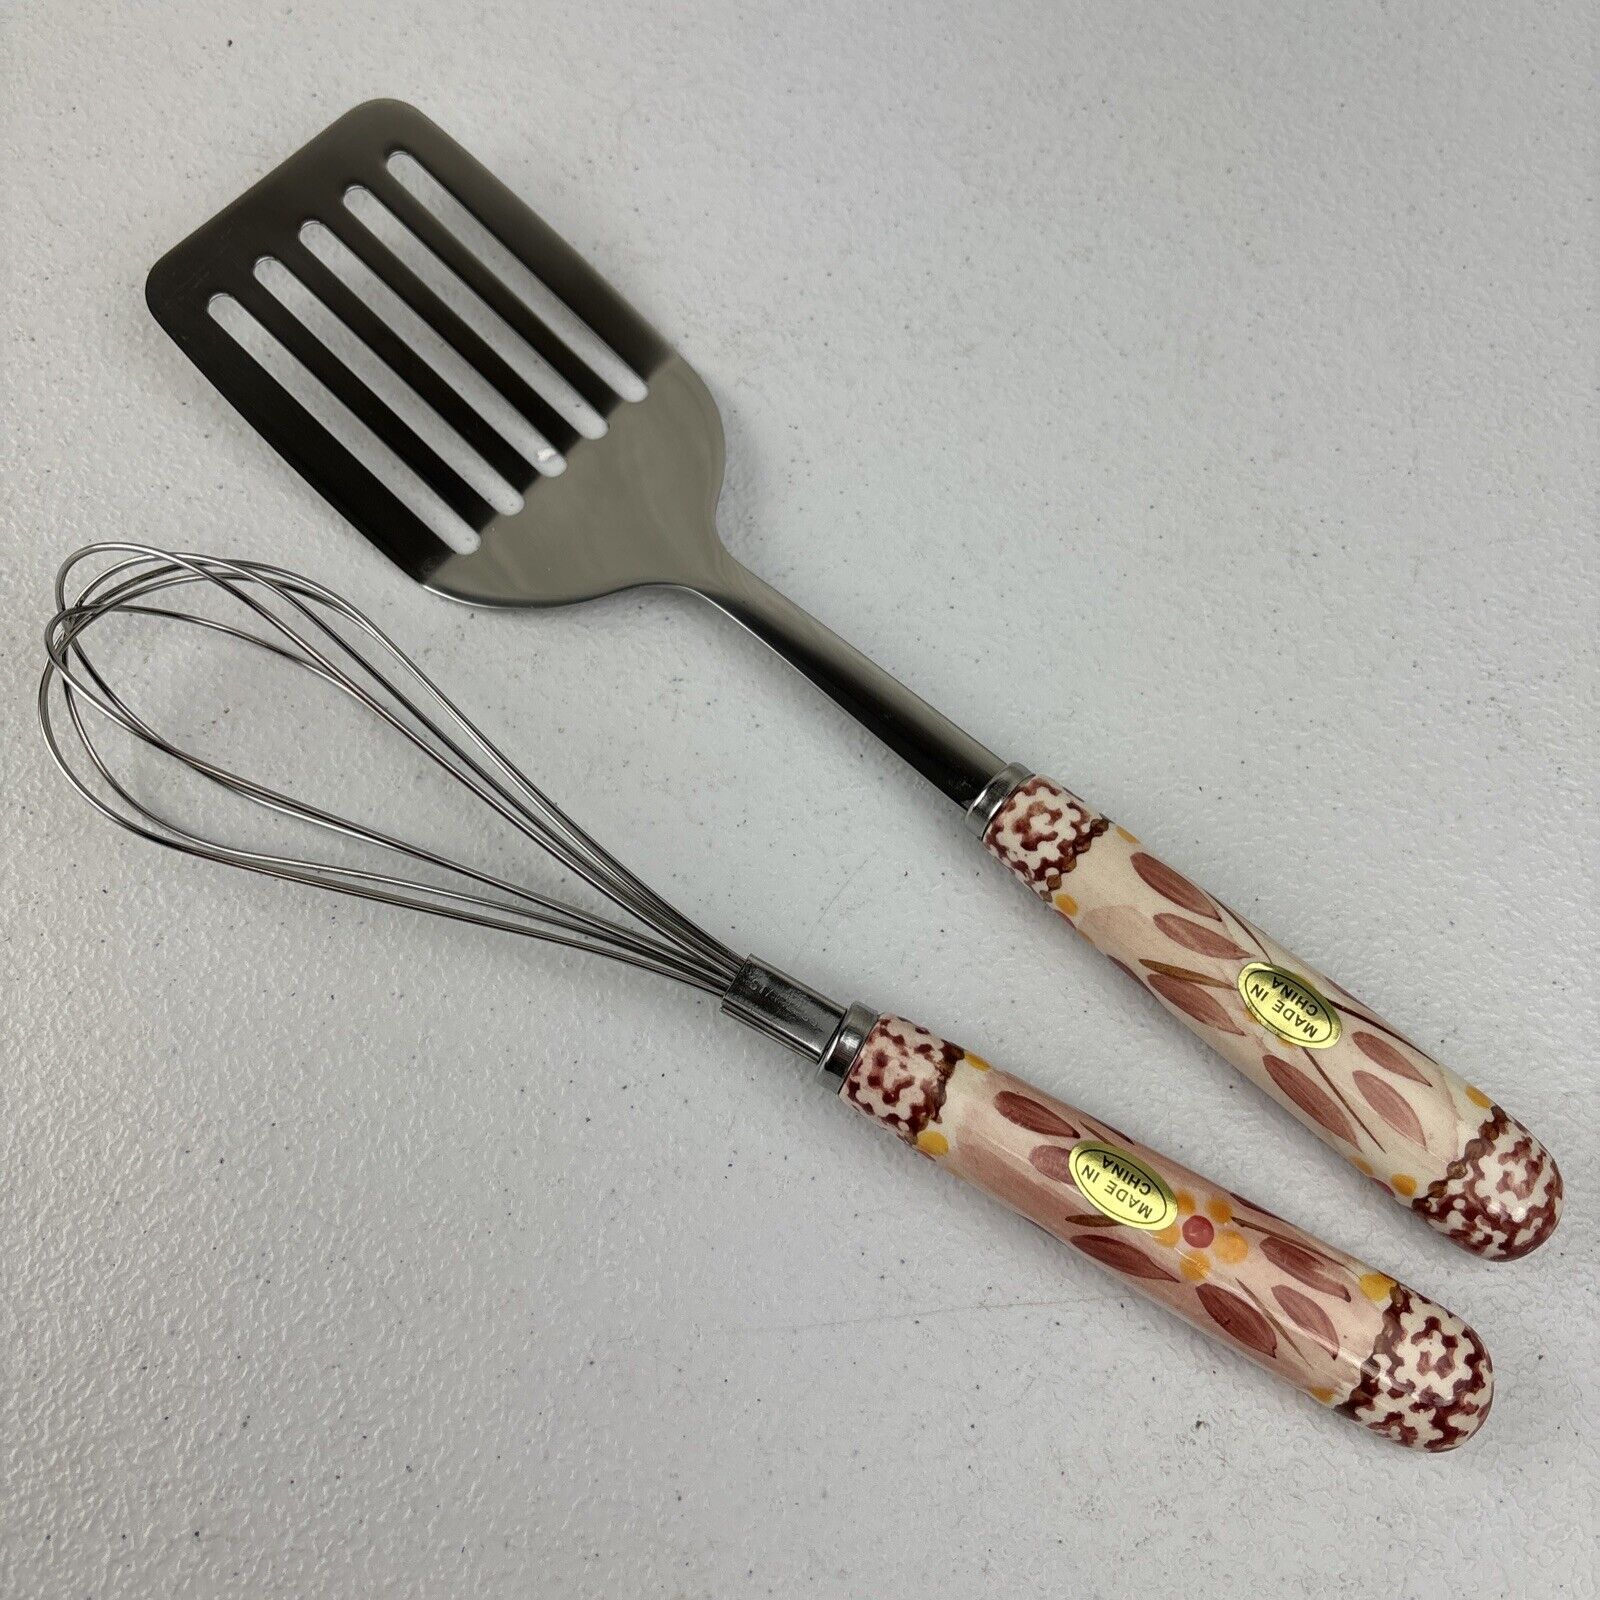 NEW Temptations Old World Cranberry Ceramic Handle Stainless Spatula & Whisk